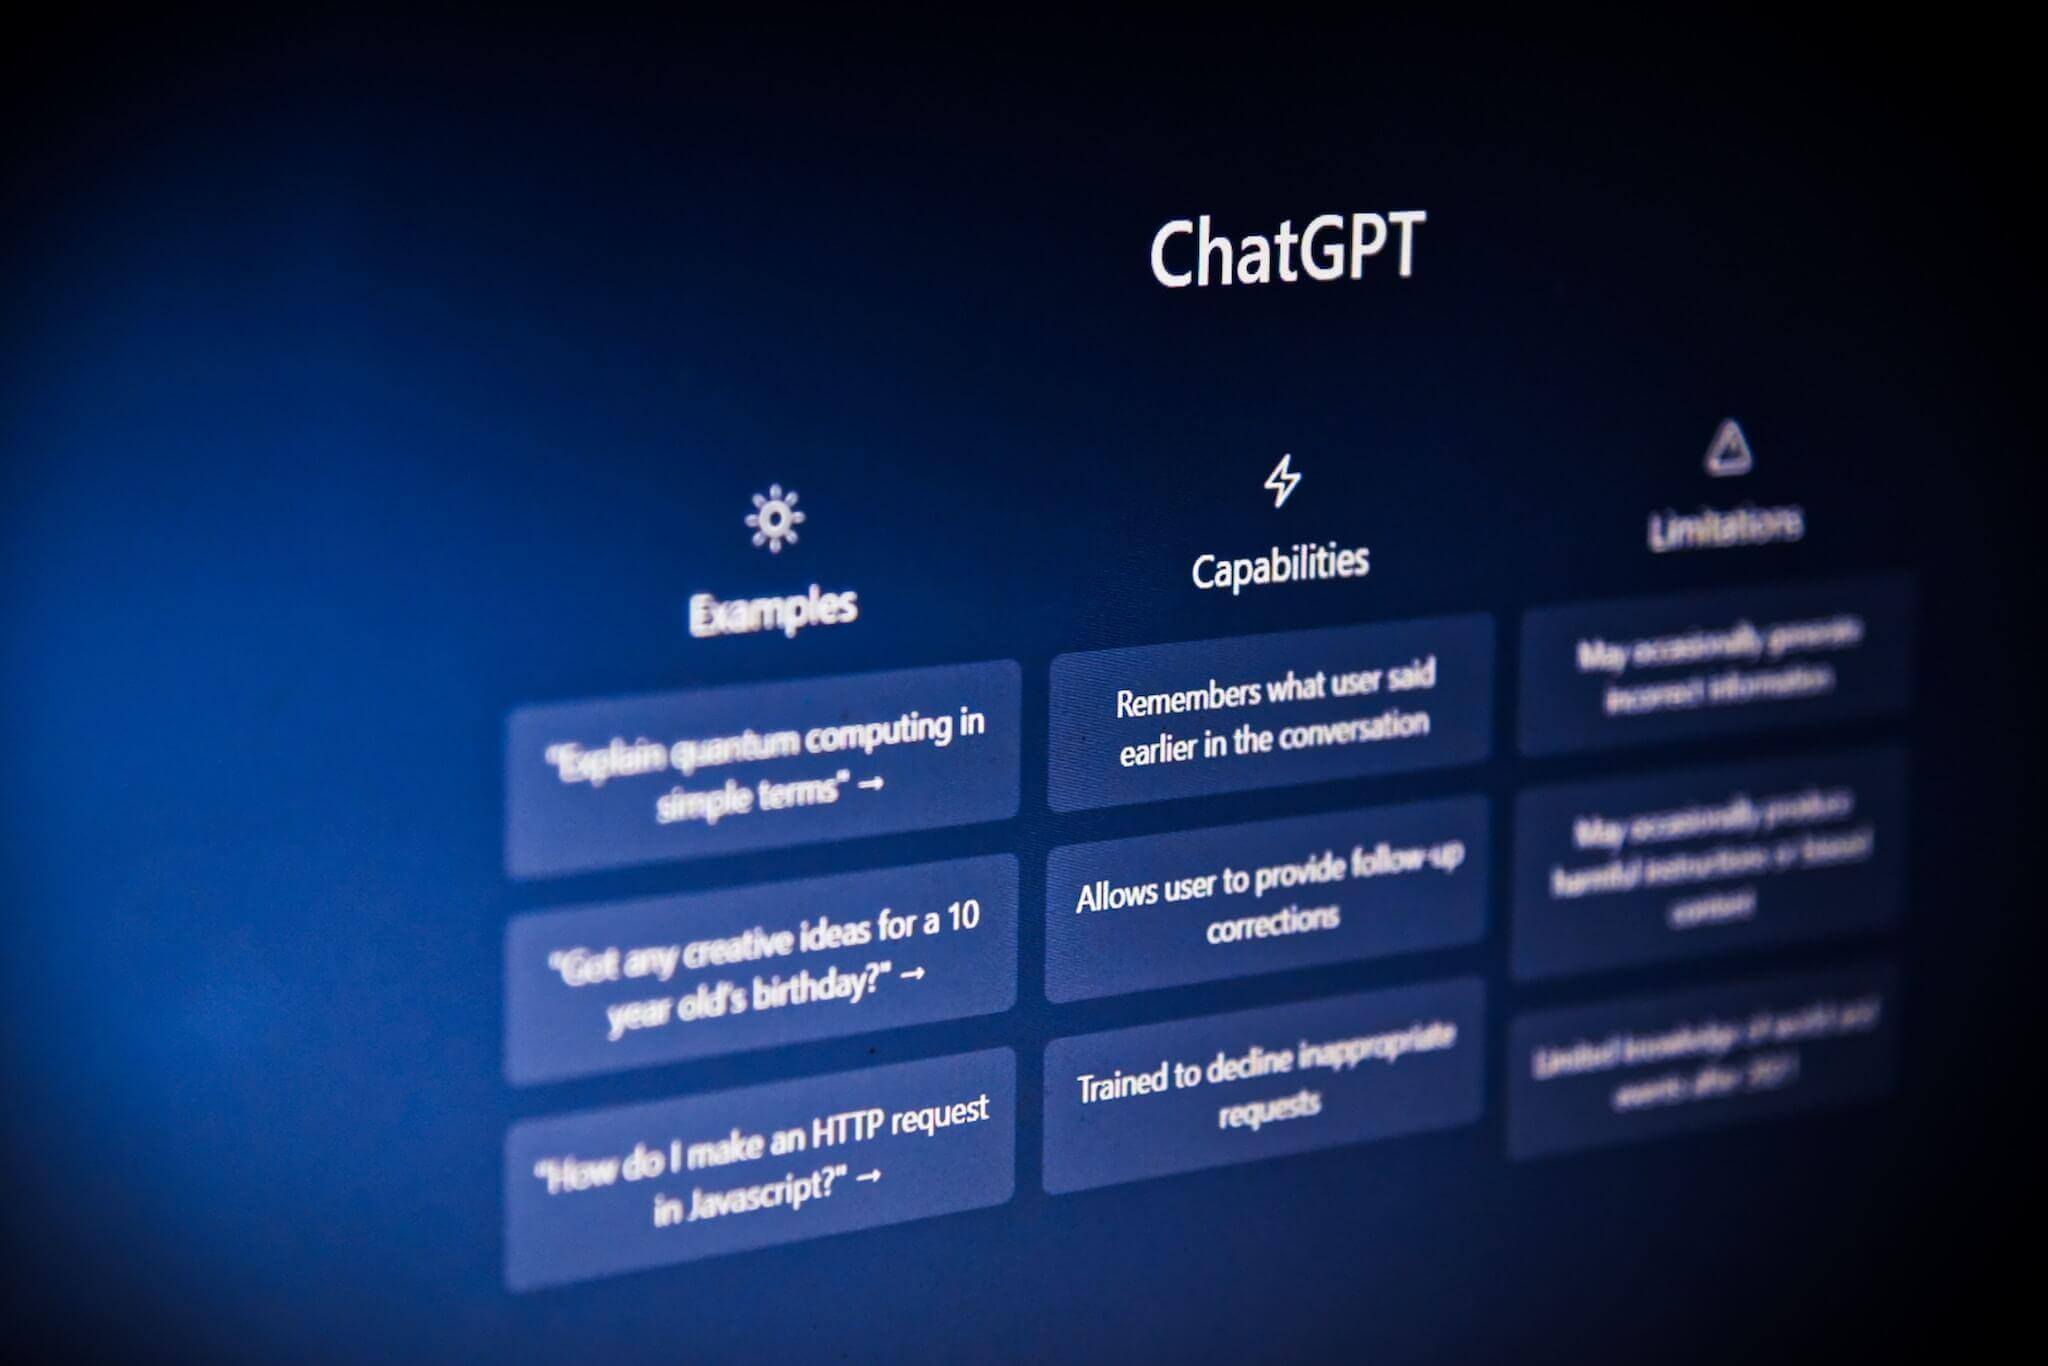 How does ChatGPT understand natural language?